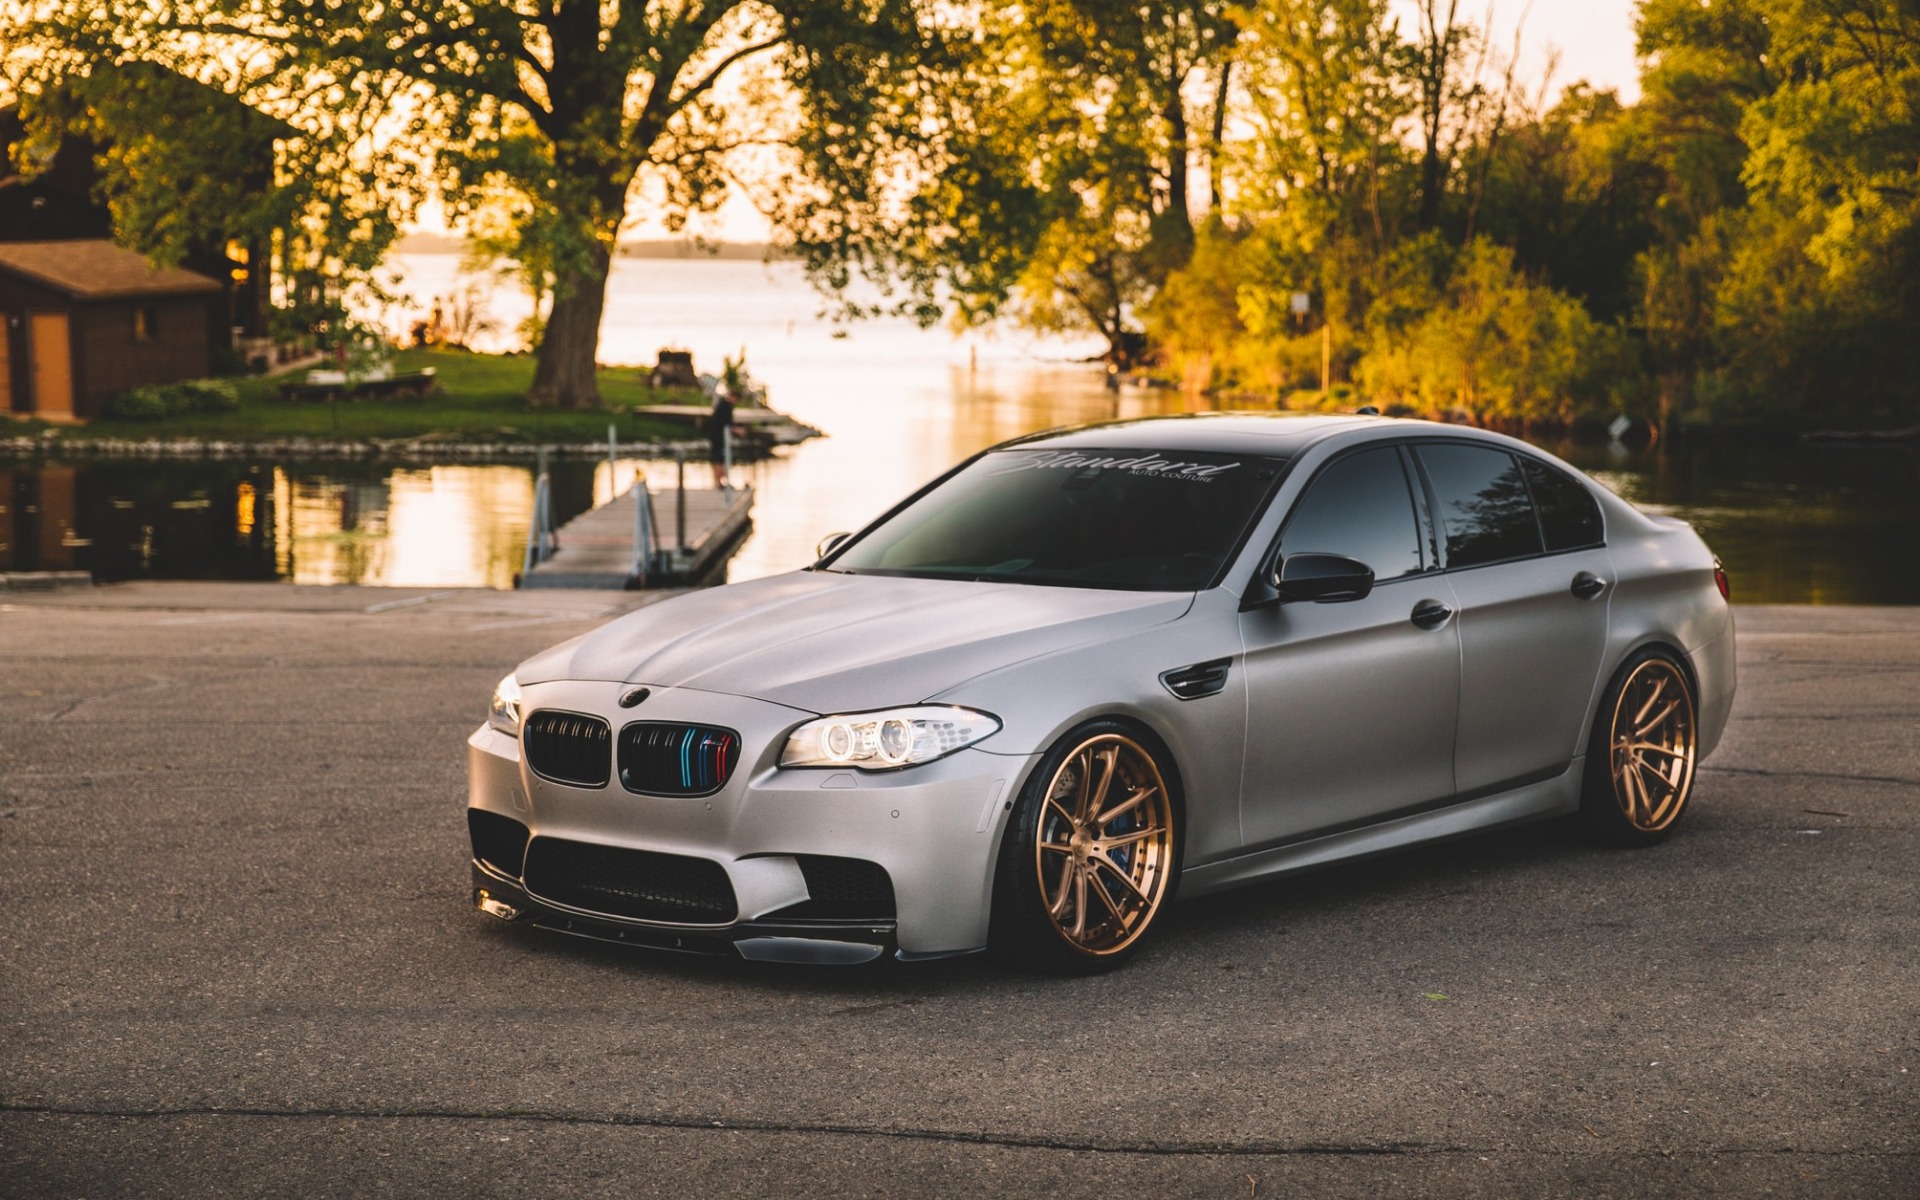 Download wallpaper BMW M F exterior, gray matt M tuning F bronze wheels, M package, German cars, BMW for desktop with resolution 1920x1200. High Quality HD picture wallpaper